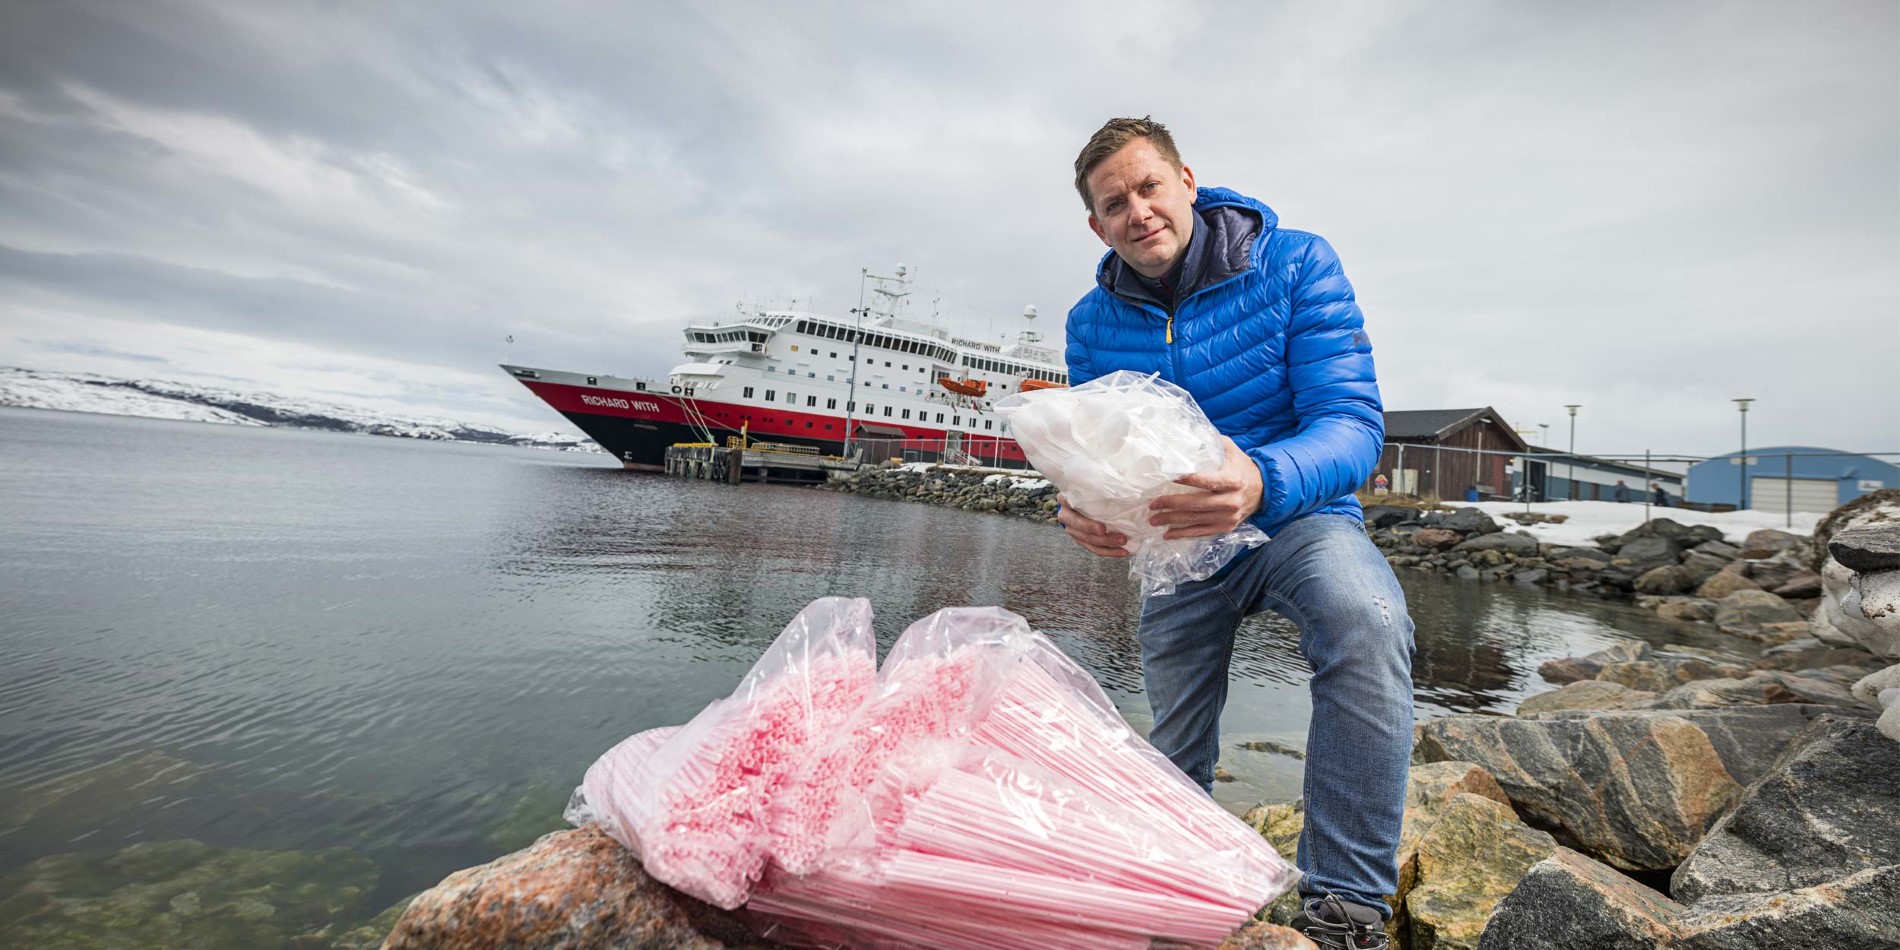 PLASTIC BAN: One million plastic straws a year are among the single use plastic items that will removed from all Hurtigruten ships this summer, as the company imposes a ban on single use plastic. Hurtigruten CEO Daniel Skjeldam, Hotel Manager Kristian Skar and rest of Hurtigruten employees are already removing plastic items from MS Richard With (in the background) and other Hurtigruten ships. 